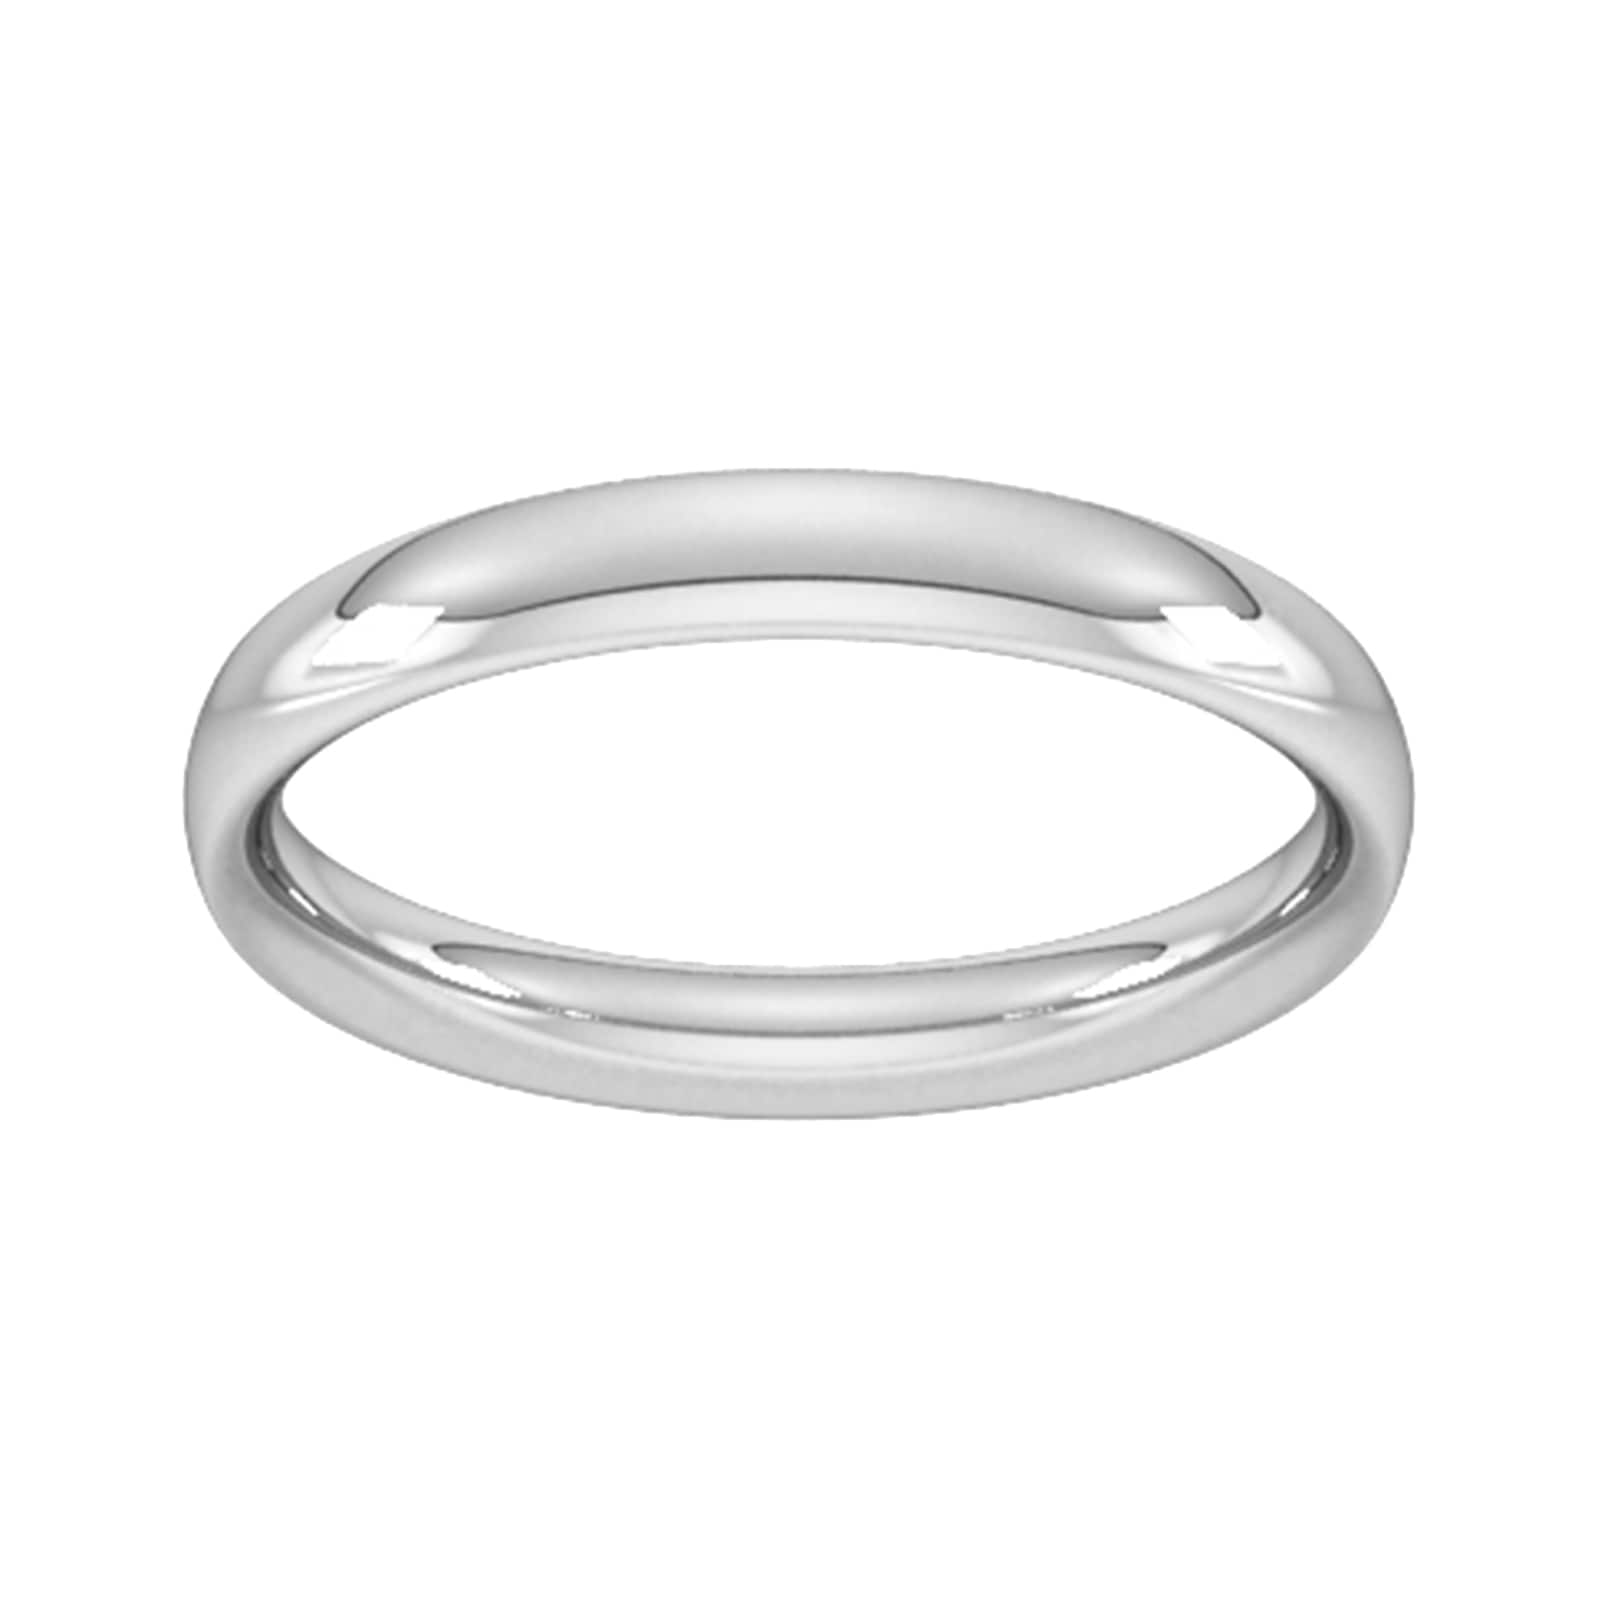 3mm traditional court heavy wedding ring in sterling silver - ring size g